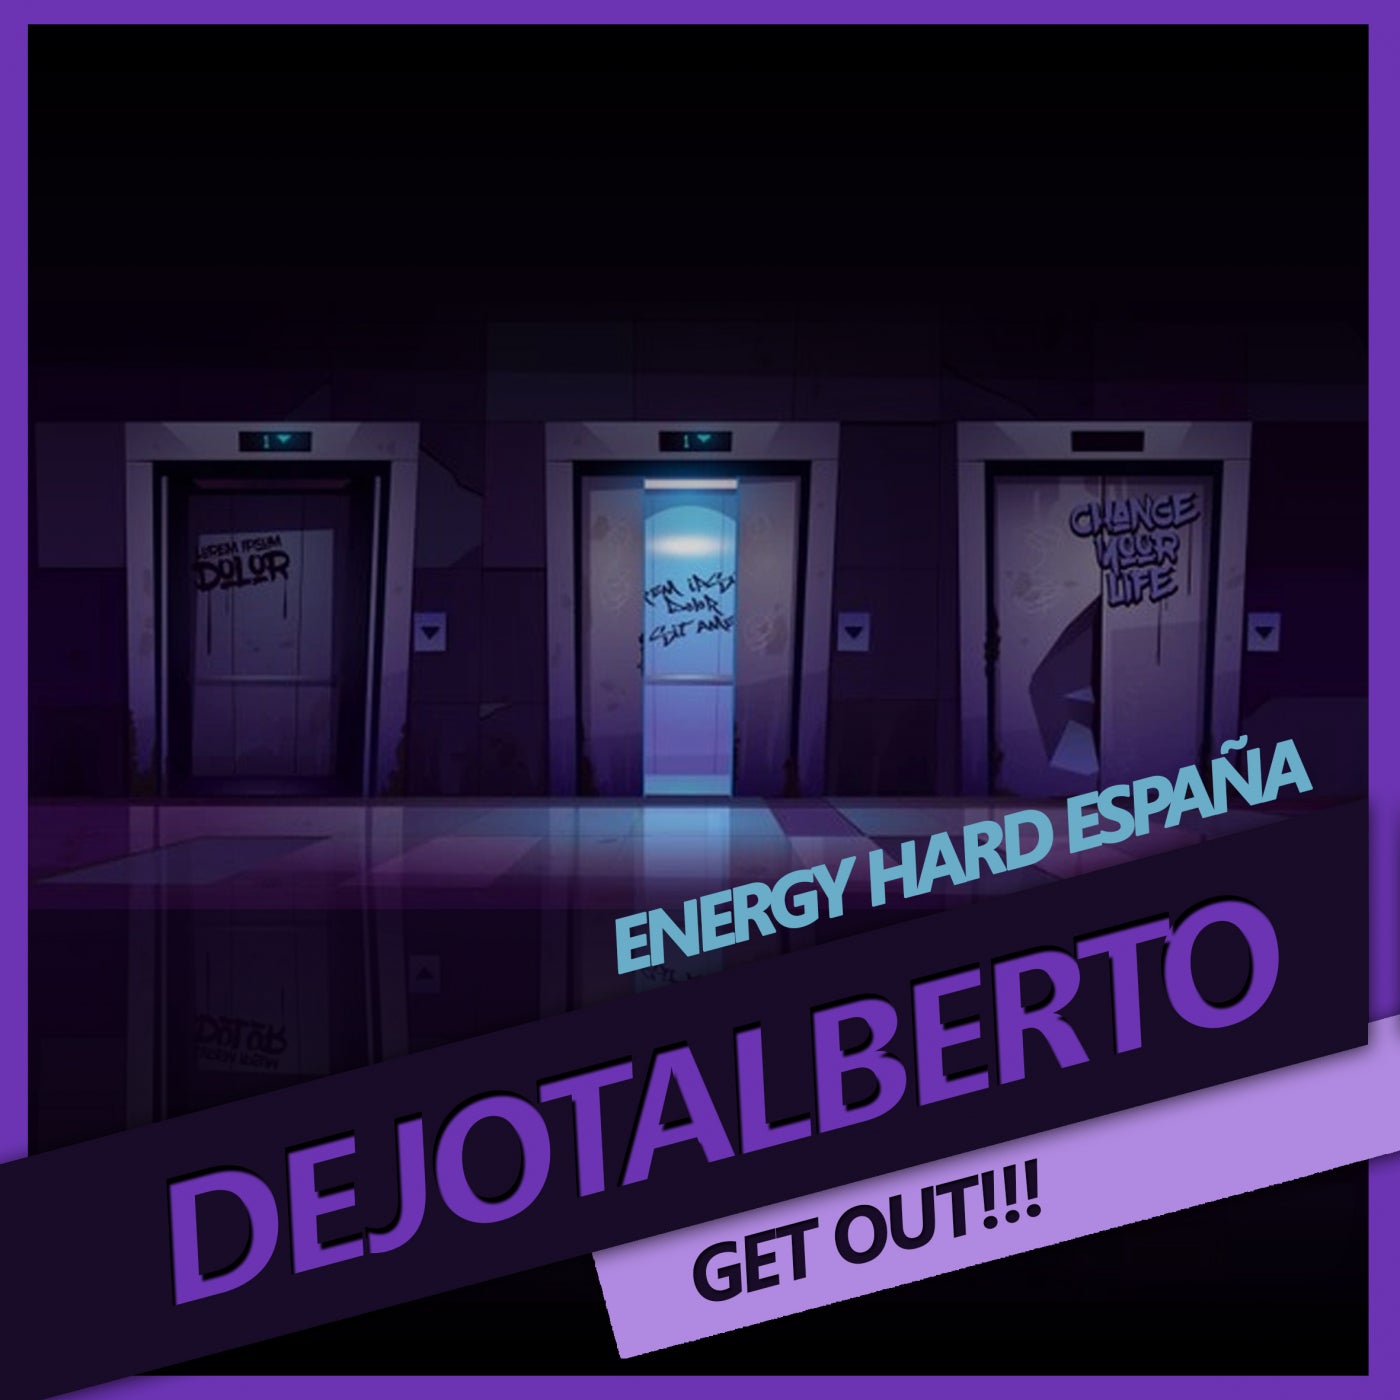 [EHE227] Dejotalberto - Get Out!!! 5194918c-ab44-4487-8d9e-378ccd02ac44